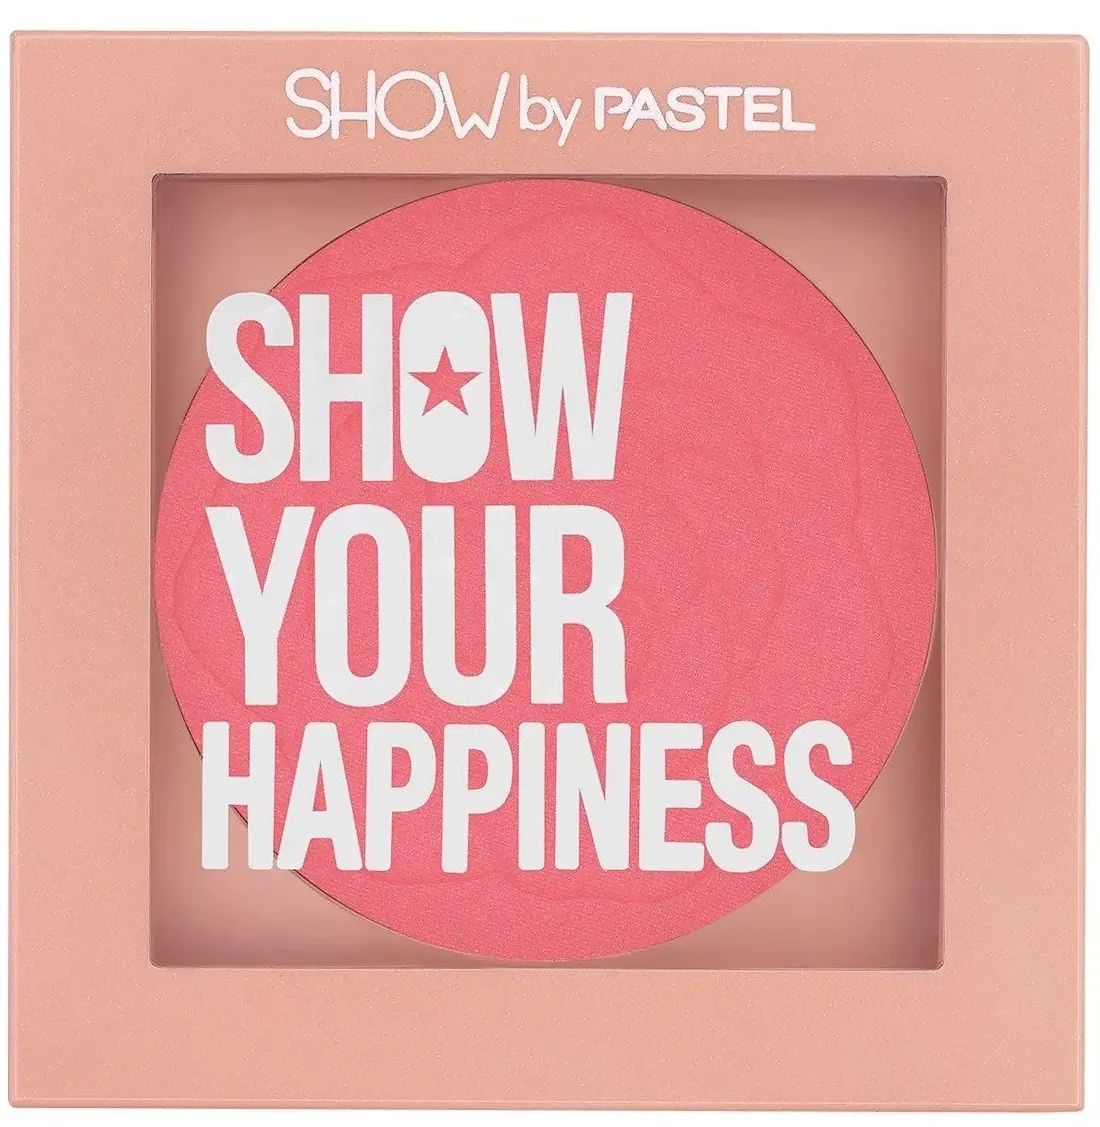 Румяна для лица Pastel Show Your Happiness Blush, 202 Colorful, 4,2 г endless happiness